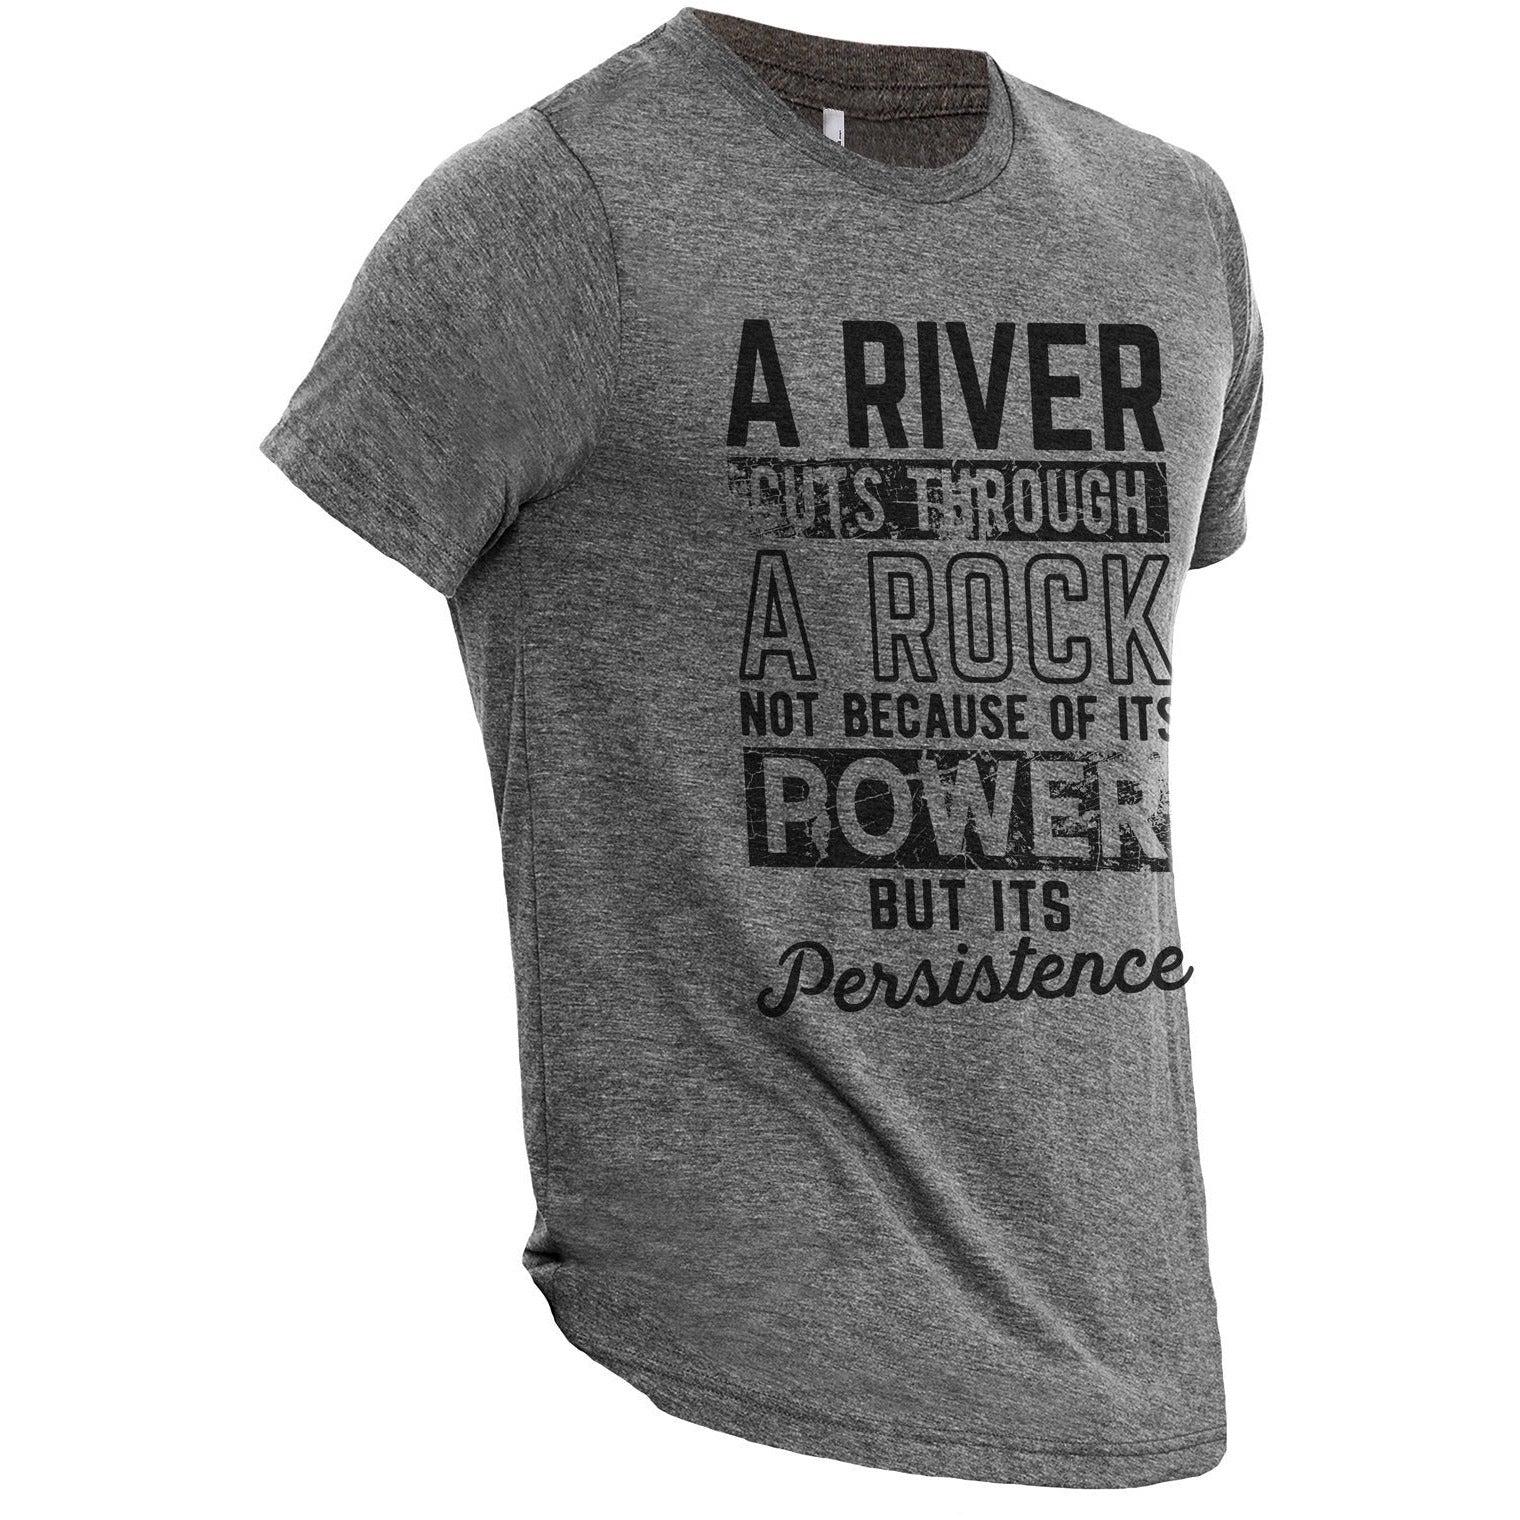 A River Cuts Through A Rock Not Because Of It's Power But It's Persistence Heather Grey Printed Graphic Men's Crew T-Shirt Tee Side View